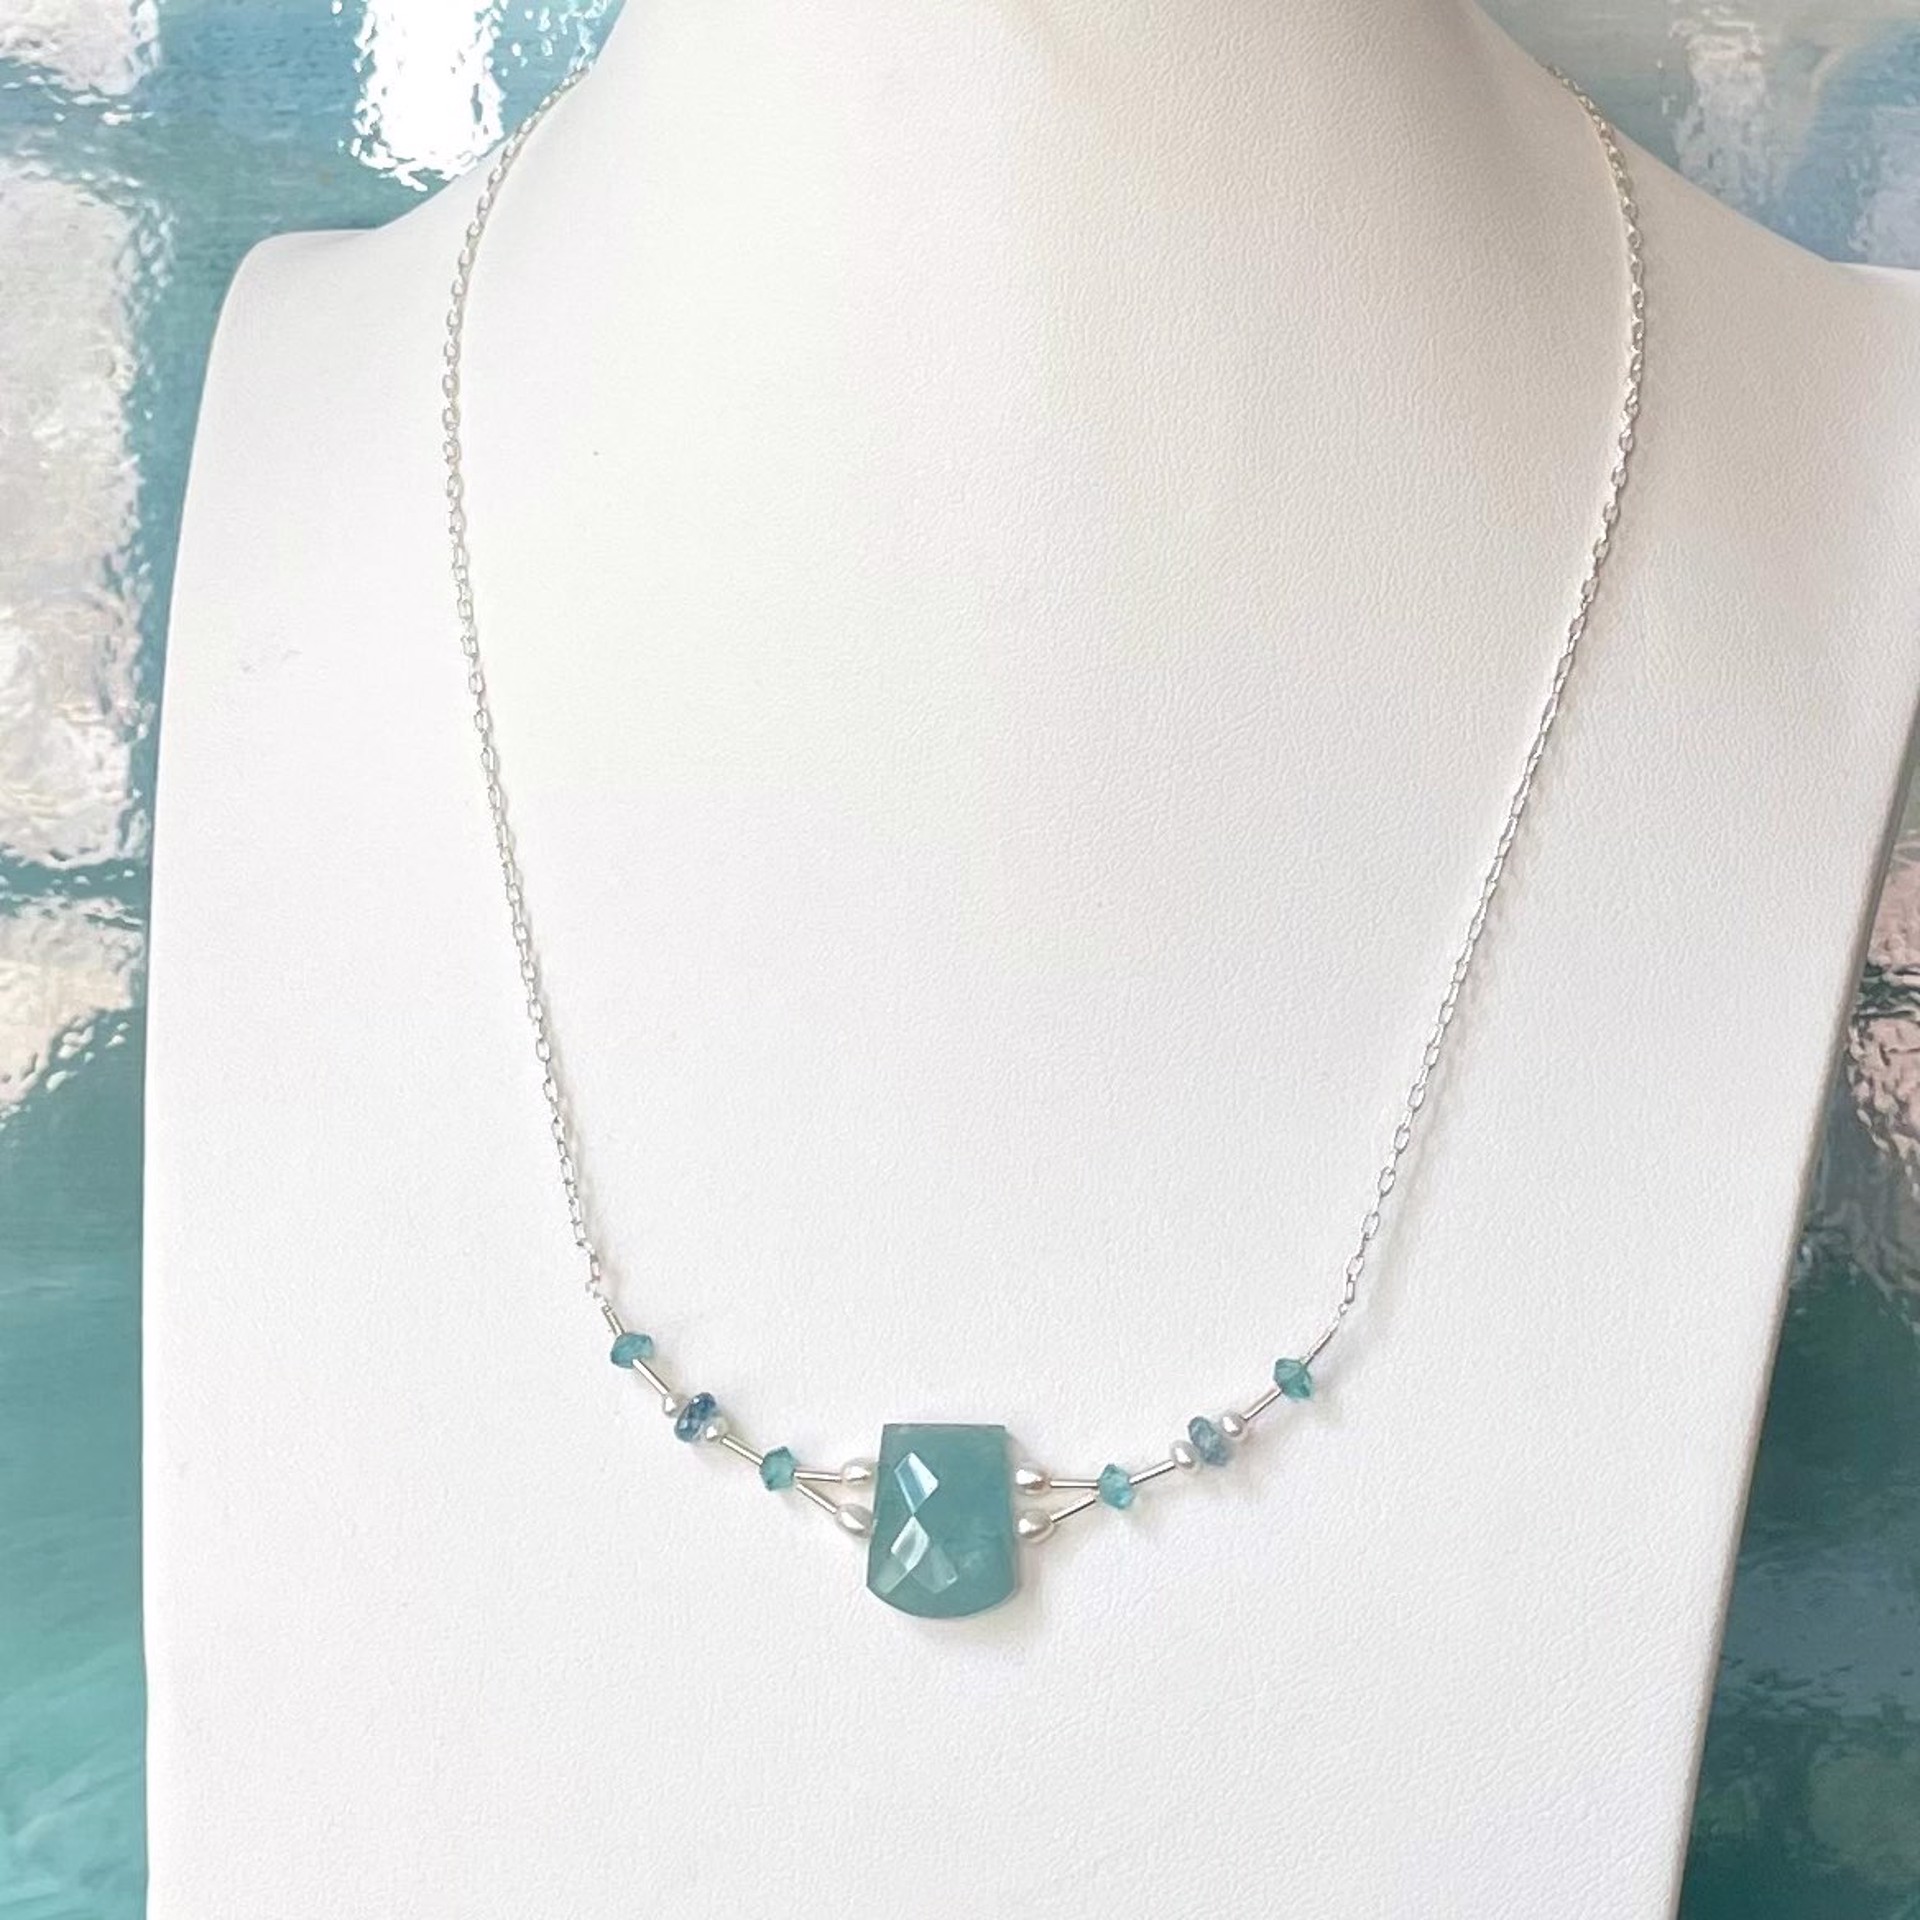 Aquamarine, Apatite, Pearls and Sterling Silver Shield Necklace by Lisa Kelley